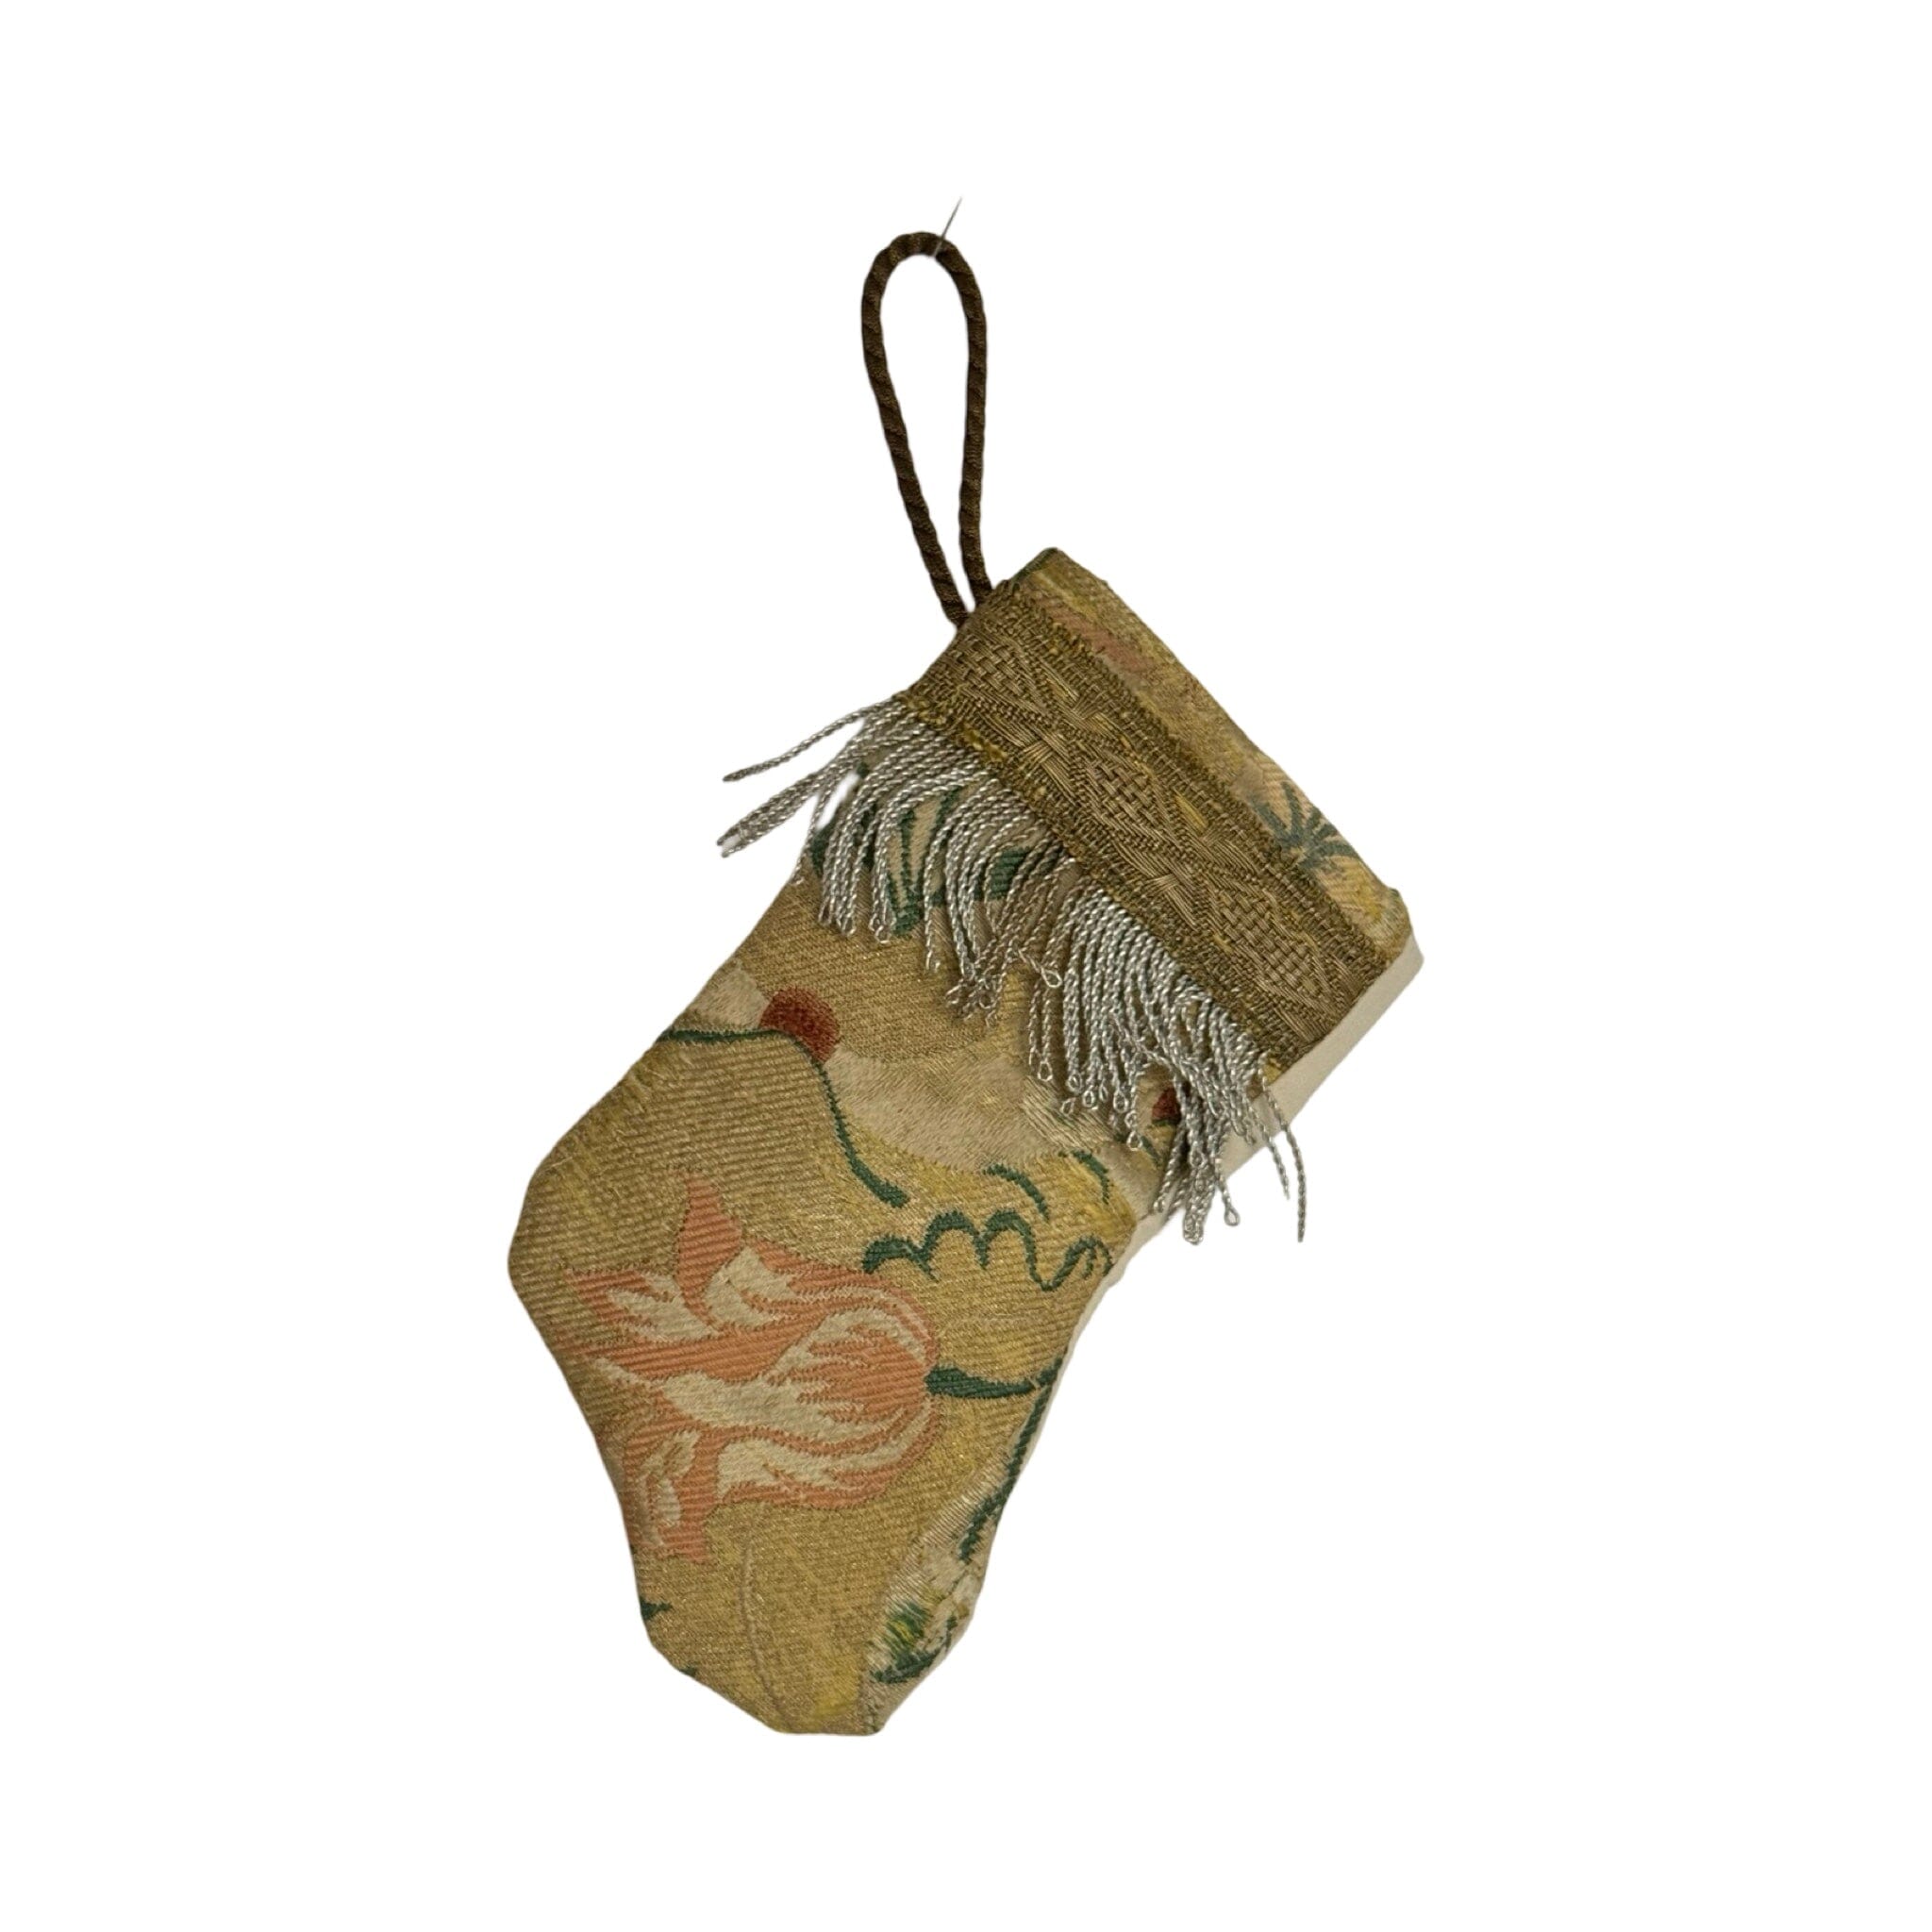 Handmade Mini Stocking Made From Vintage Fabric and Trims- Green and Gold Ornament B. Viz Design F 